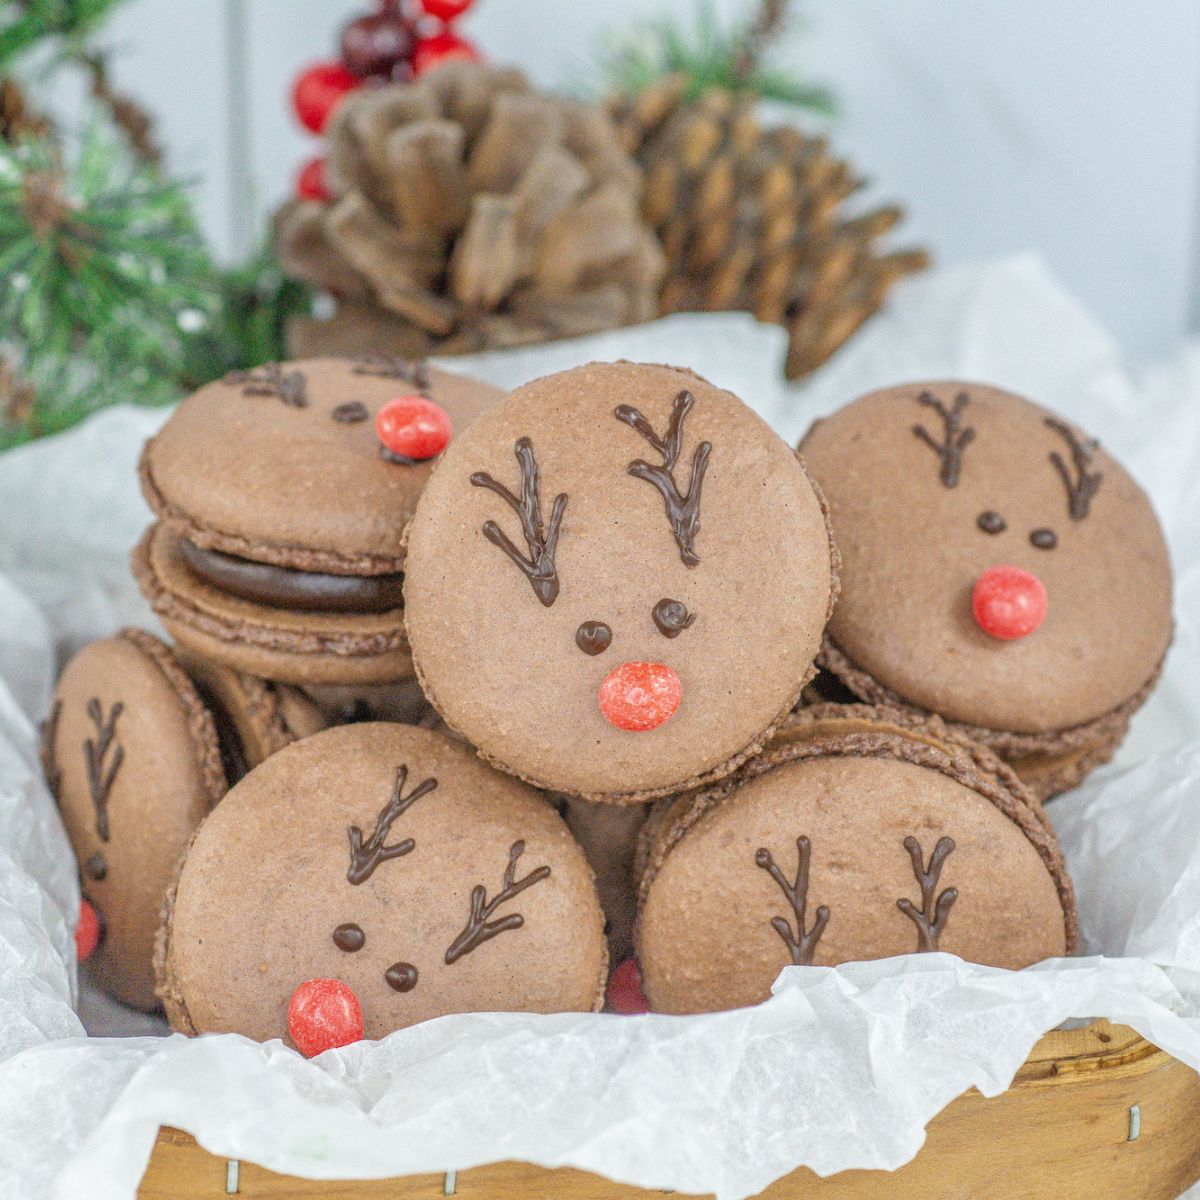 Chocolate reindeer macarons in a basket with pine cones.